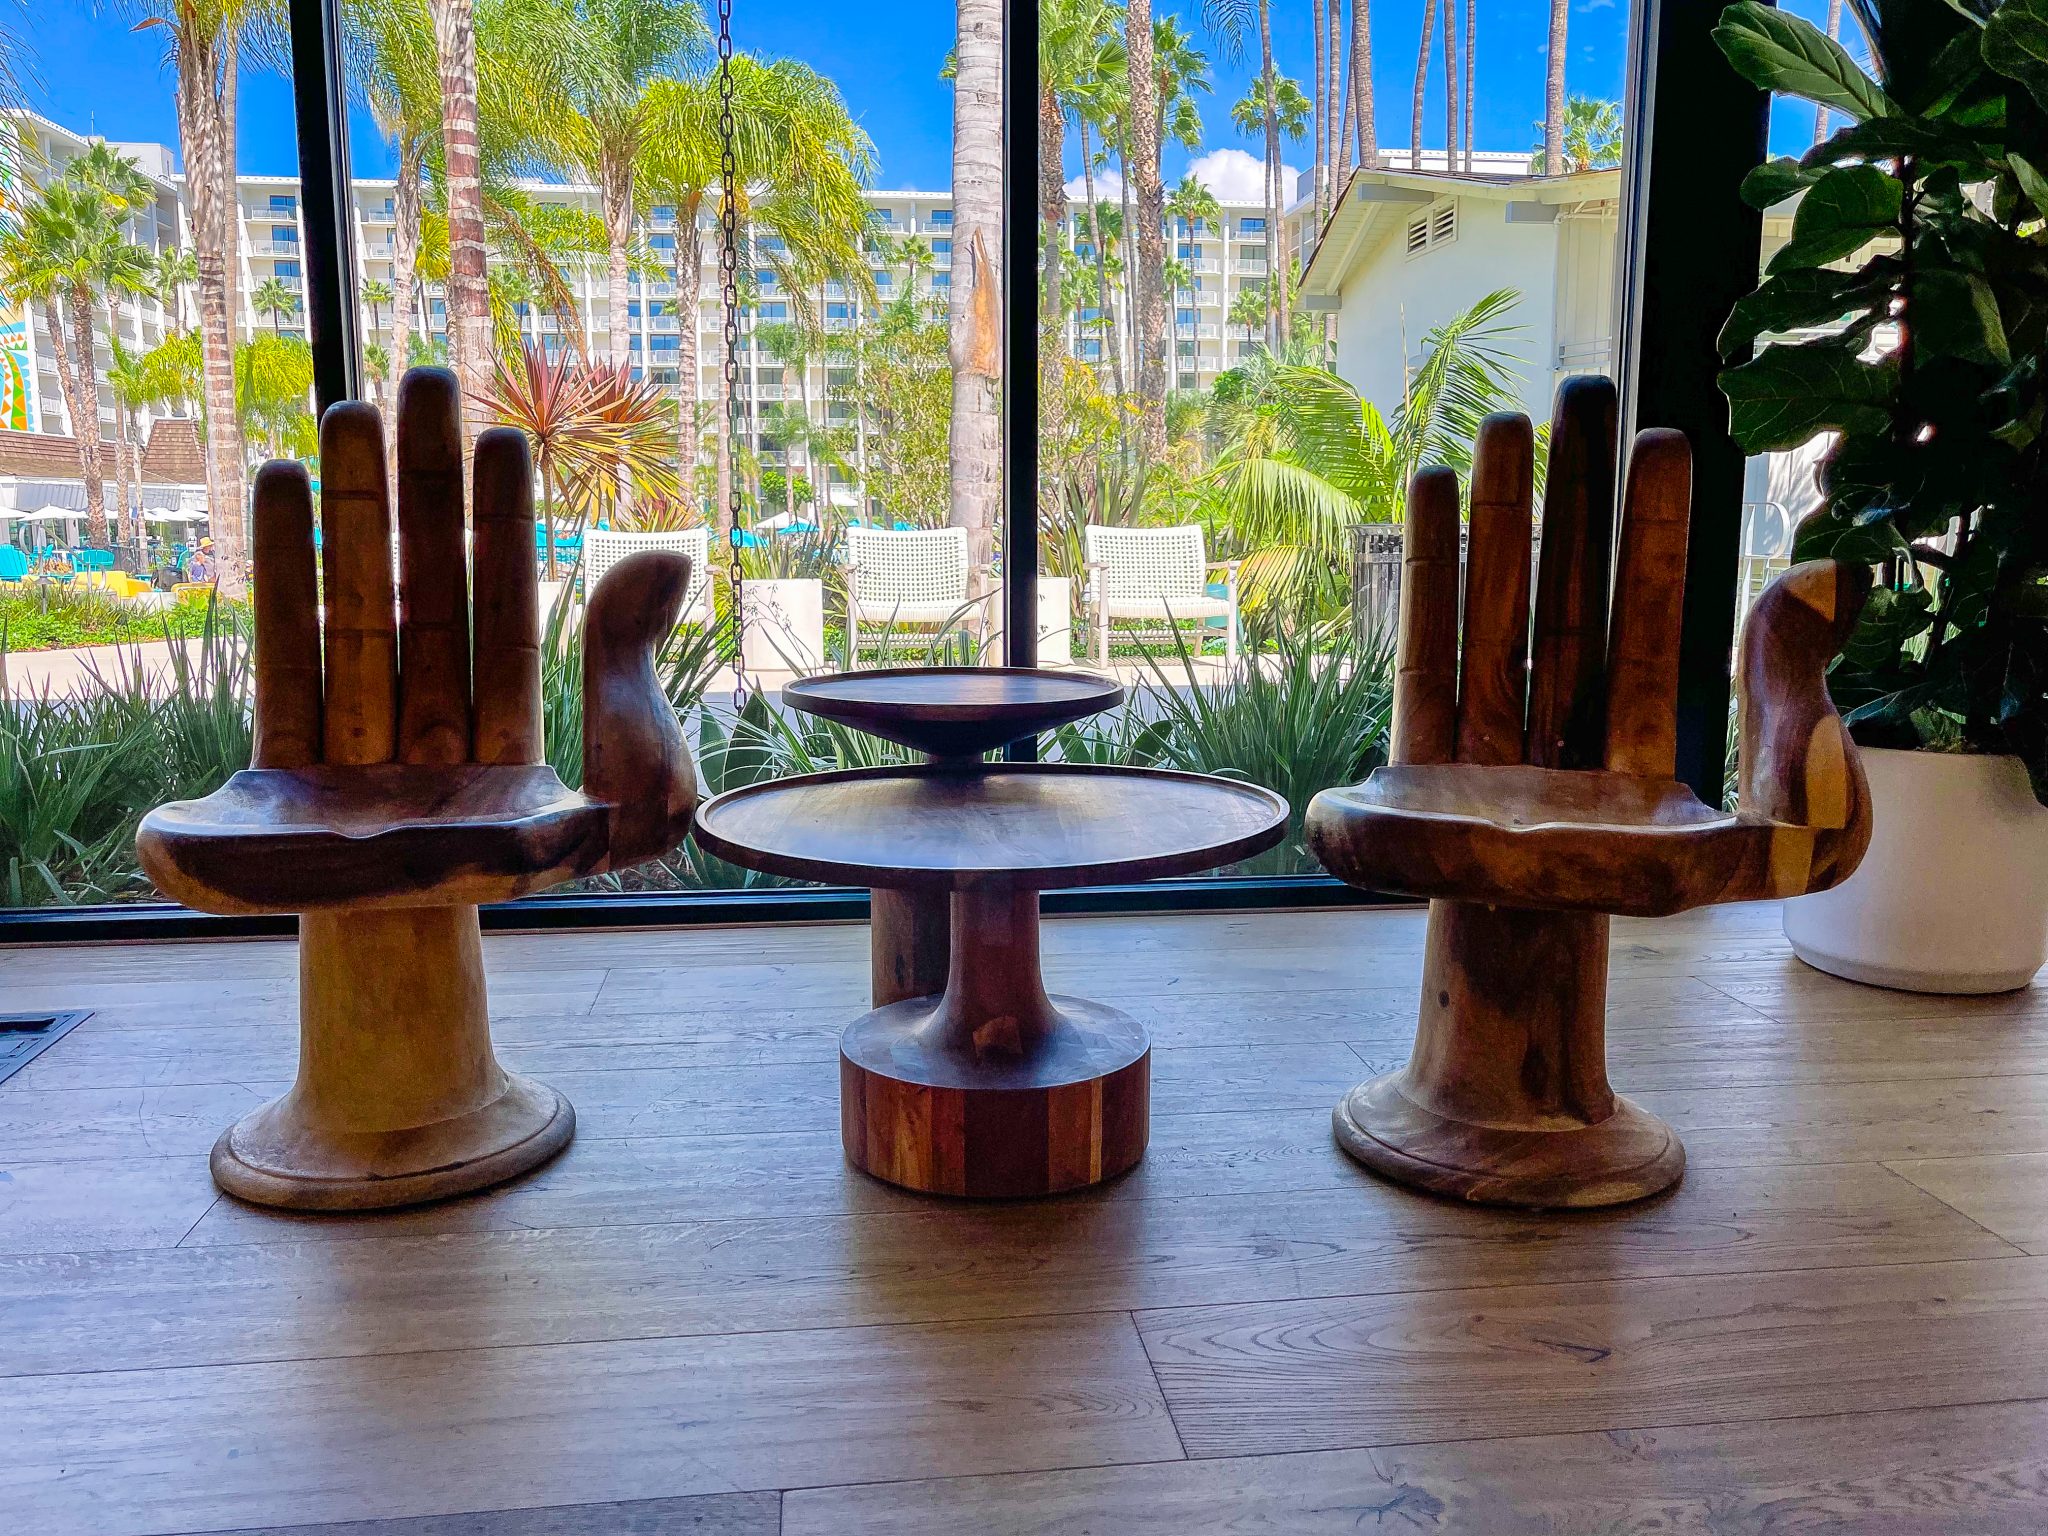 Unique hand chairs with hotel in the background